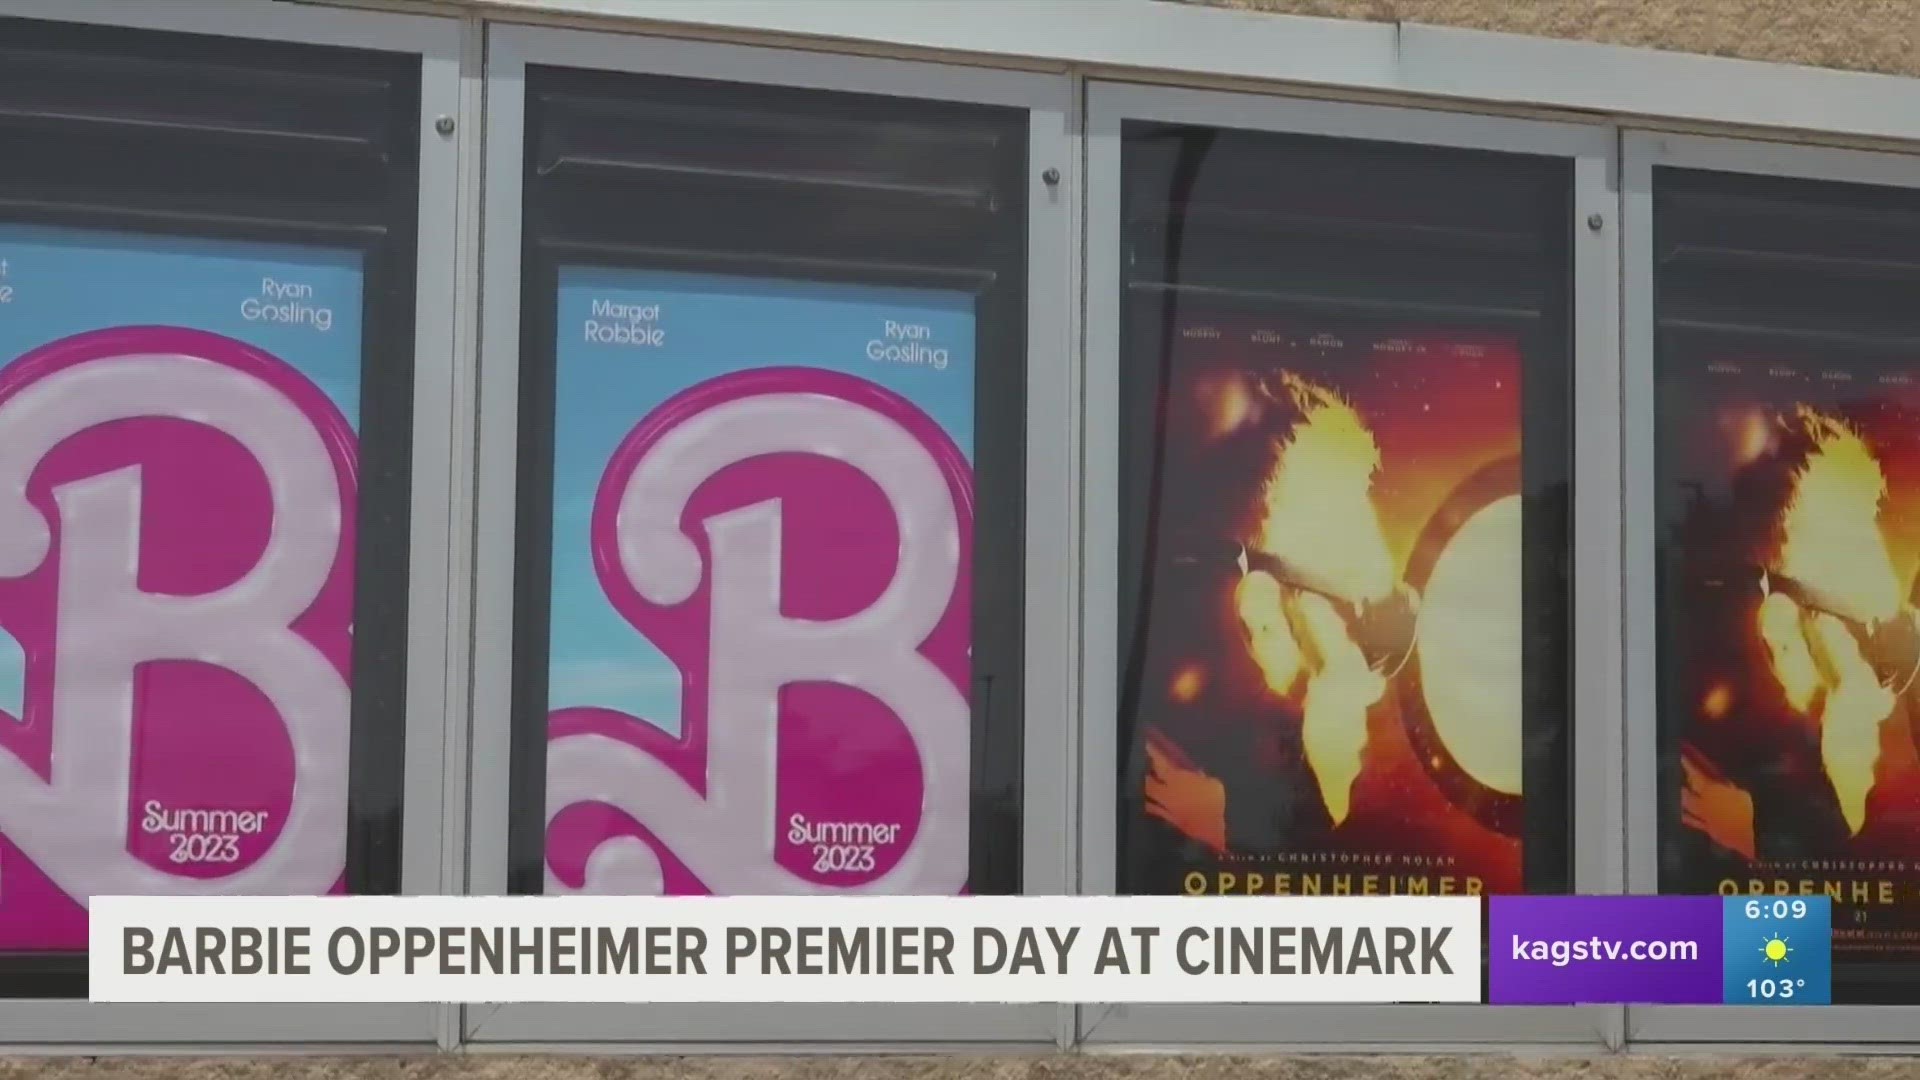 The premieres of 'Barbie' and 'Oppenheimer' are here, and fans are flocking to local cinemas to see what the hype behind both movies is about.